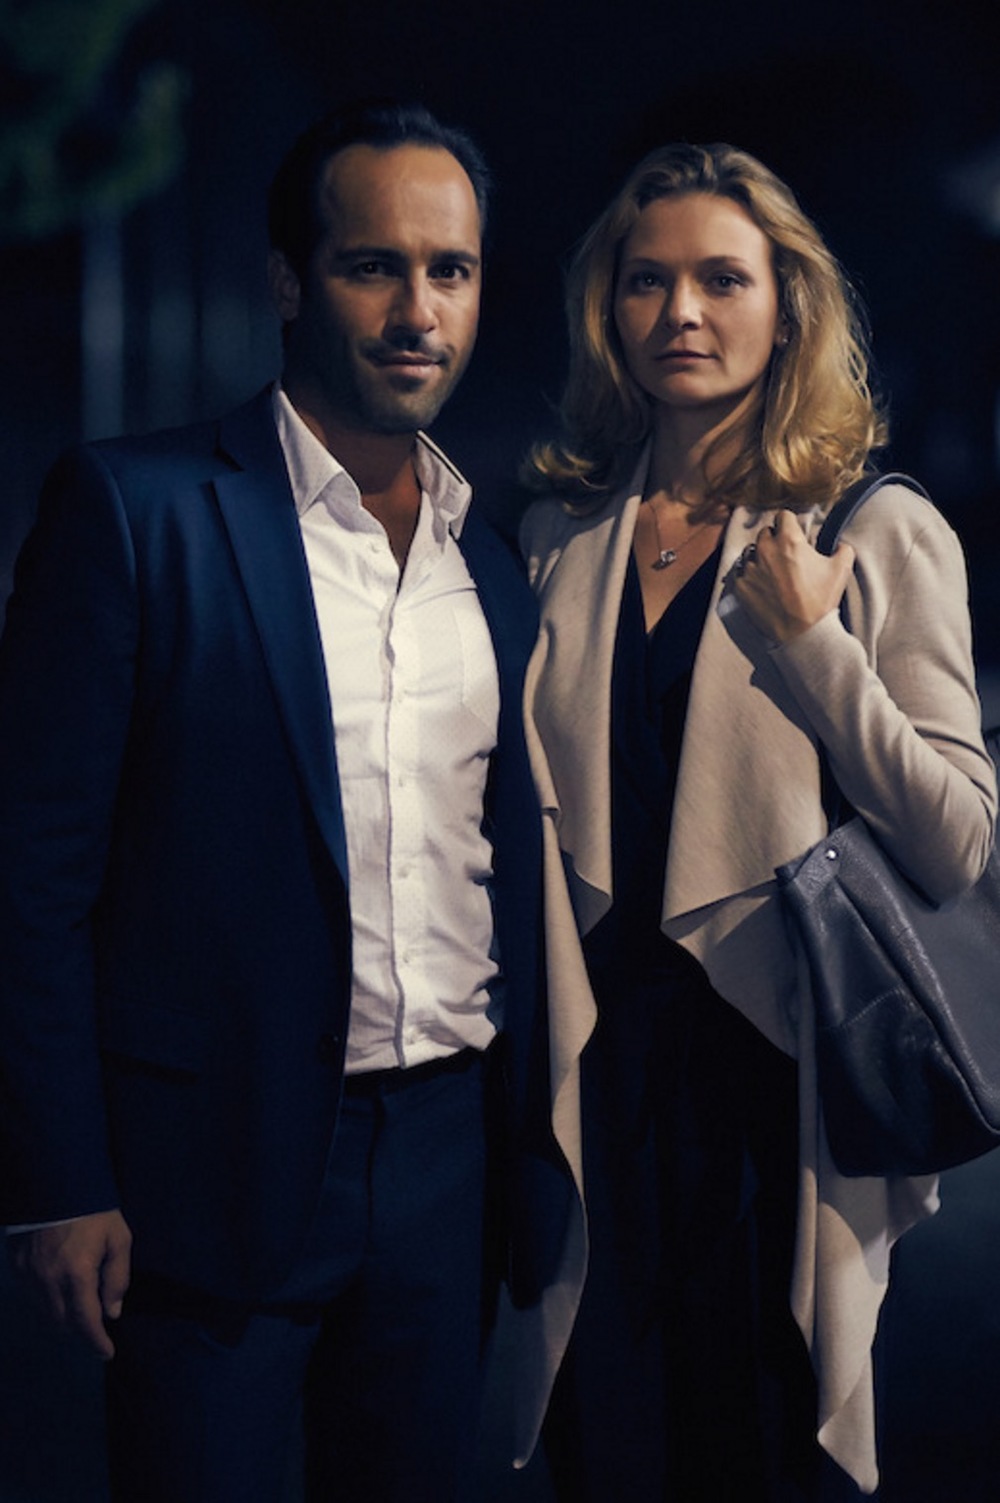 Alex Dimitriades as Joe and Leeanna Walsman as Anna in STOA. Photo by Ben King. image - supplied/ABCTV